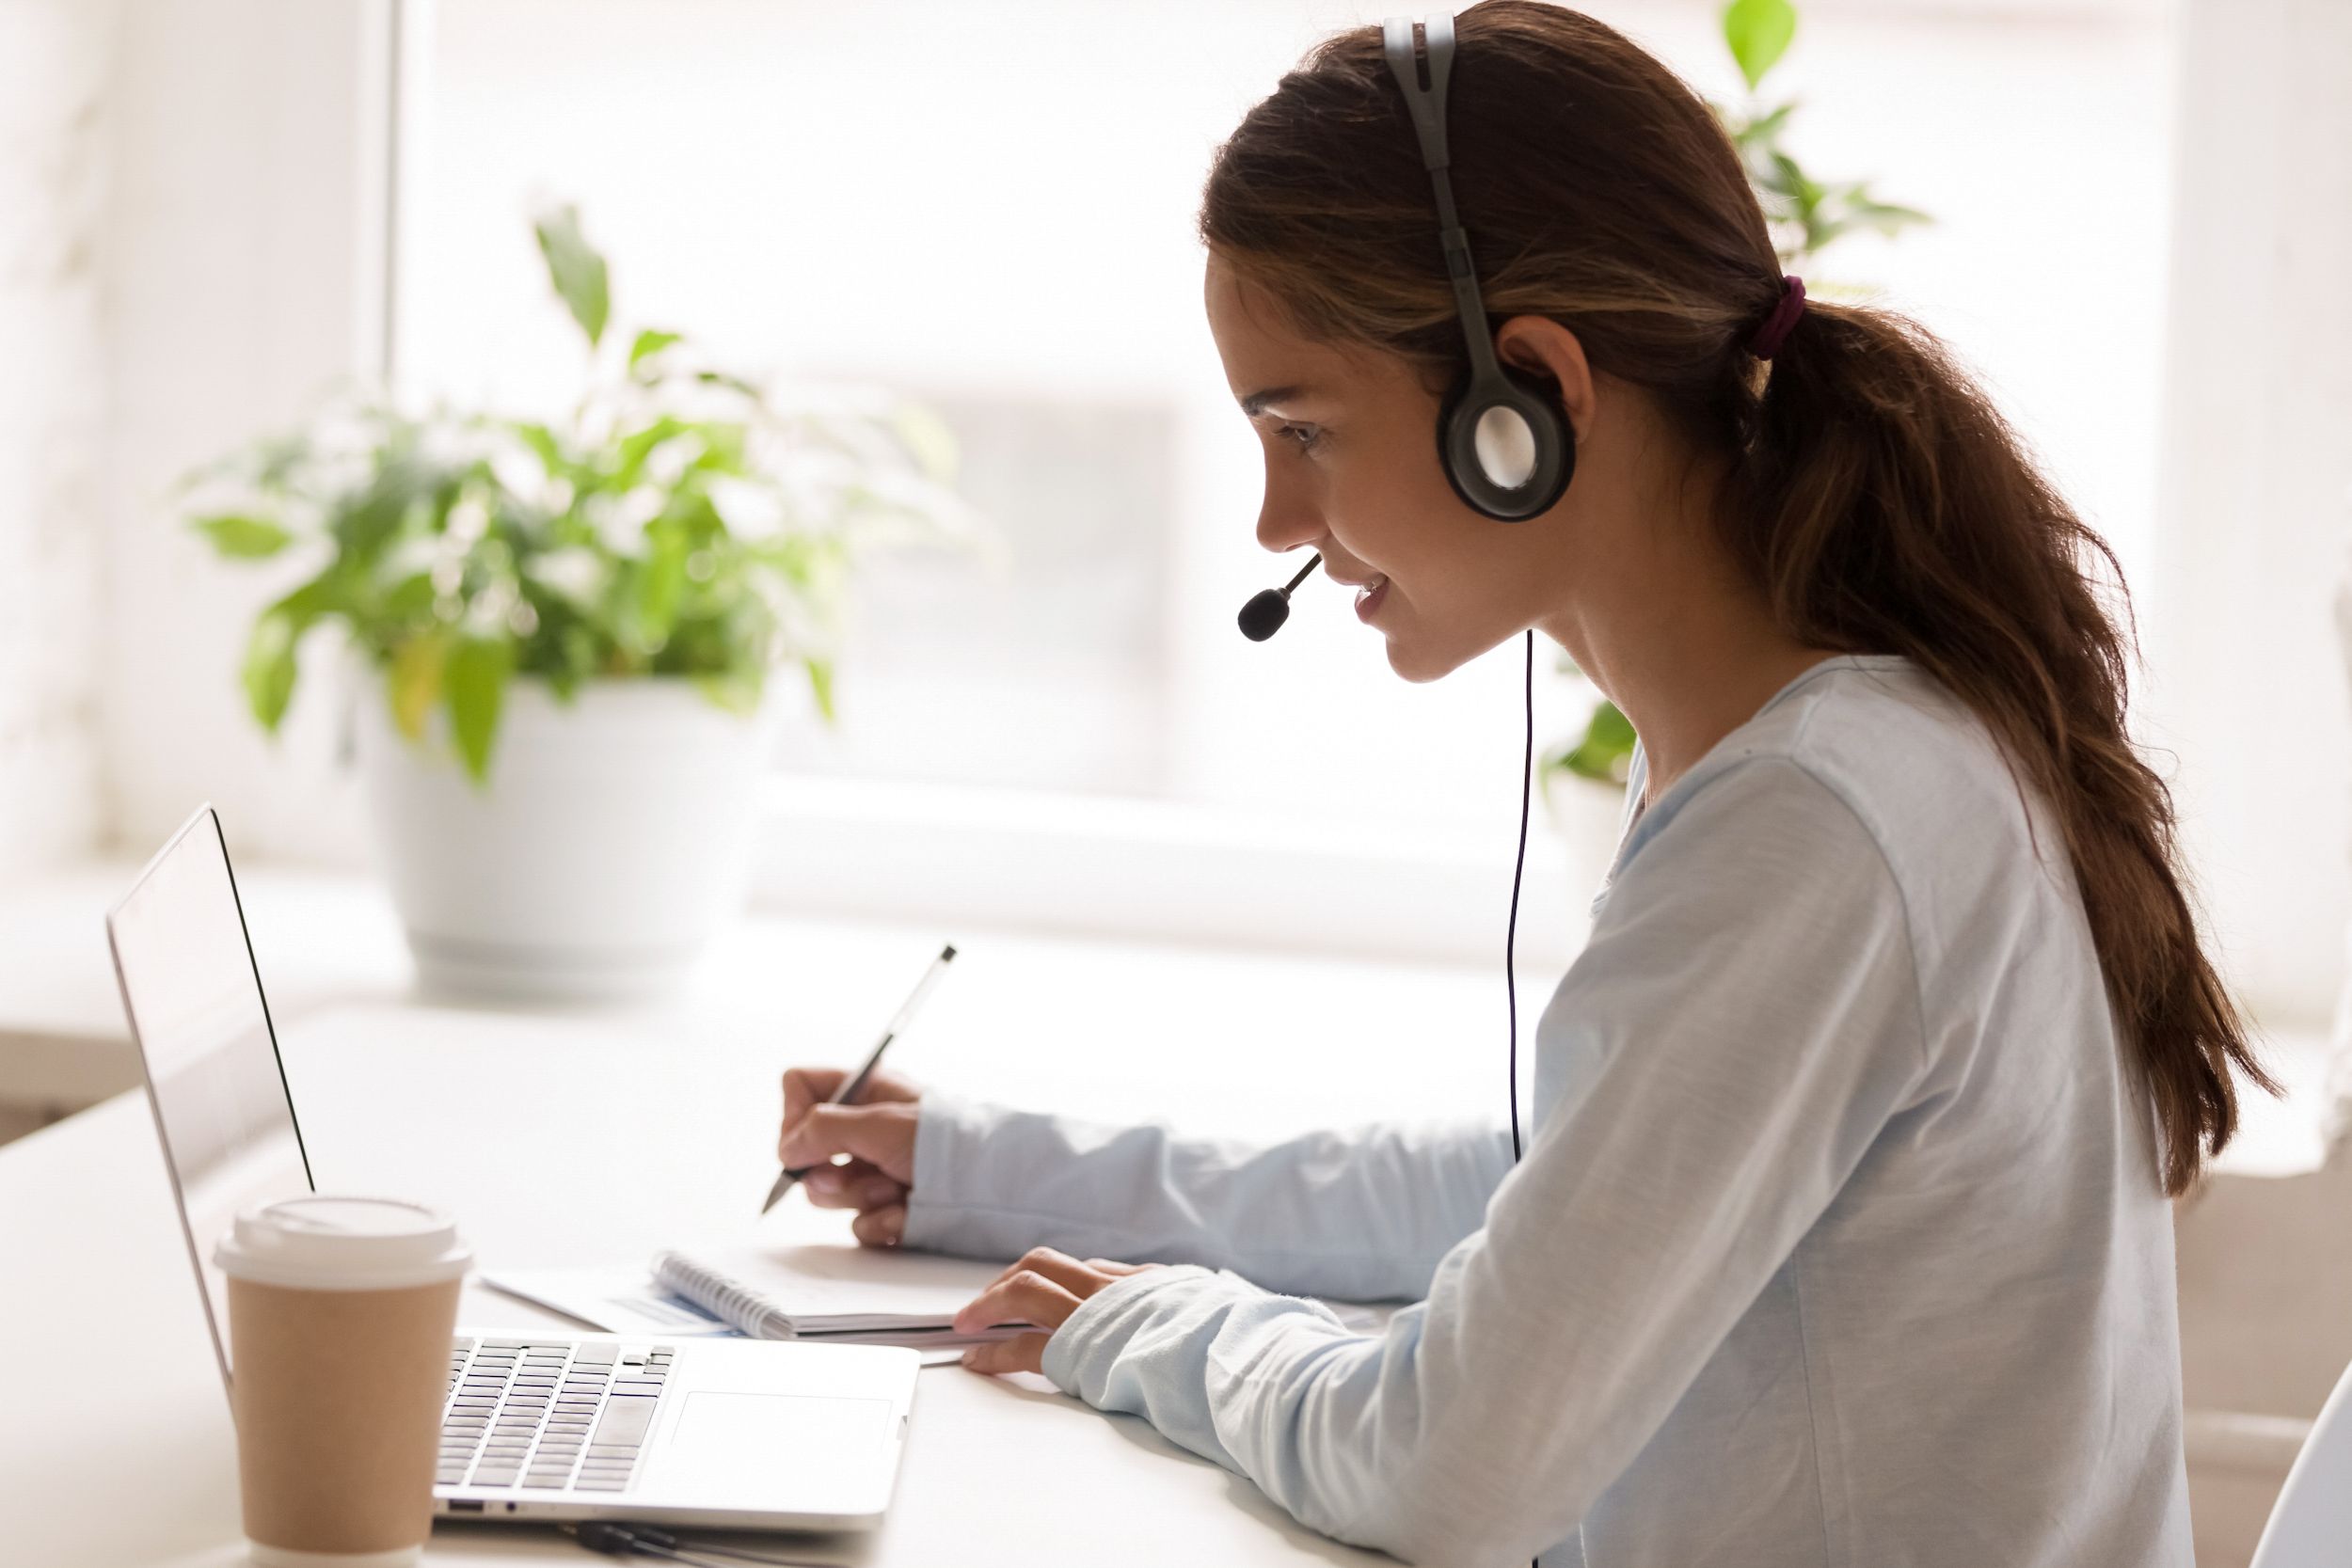 Call centre image representing good customer experience